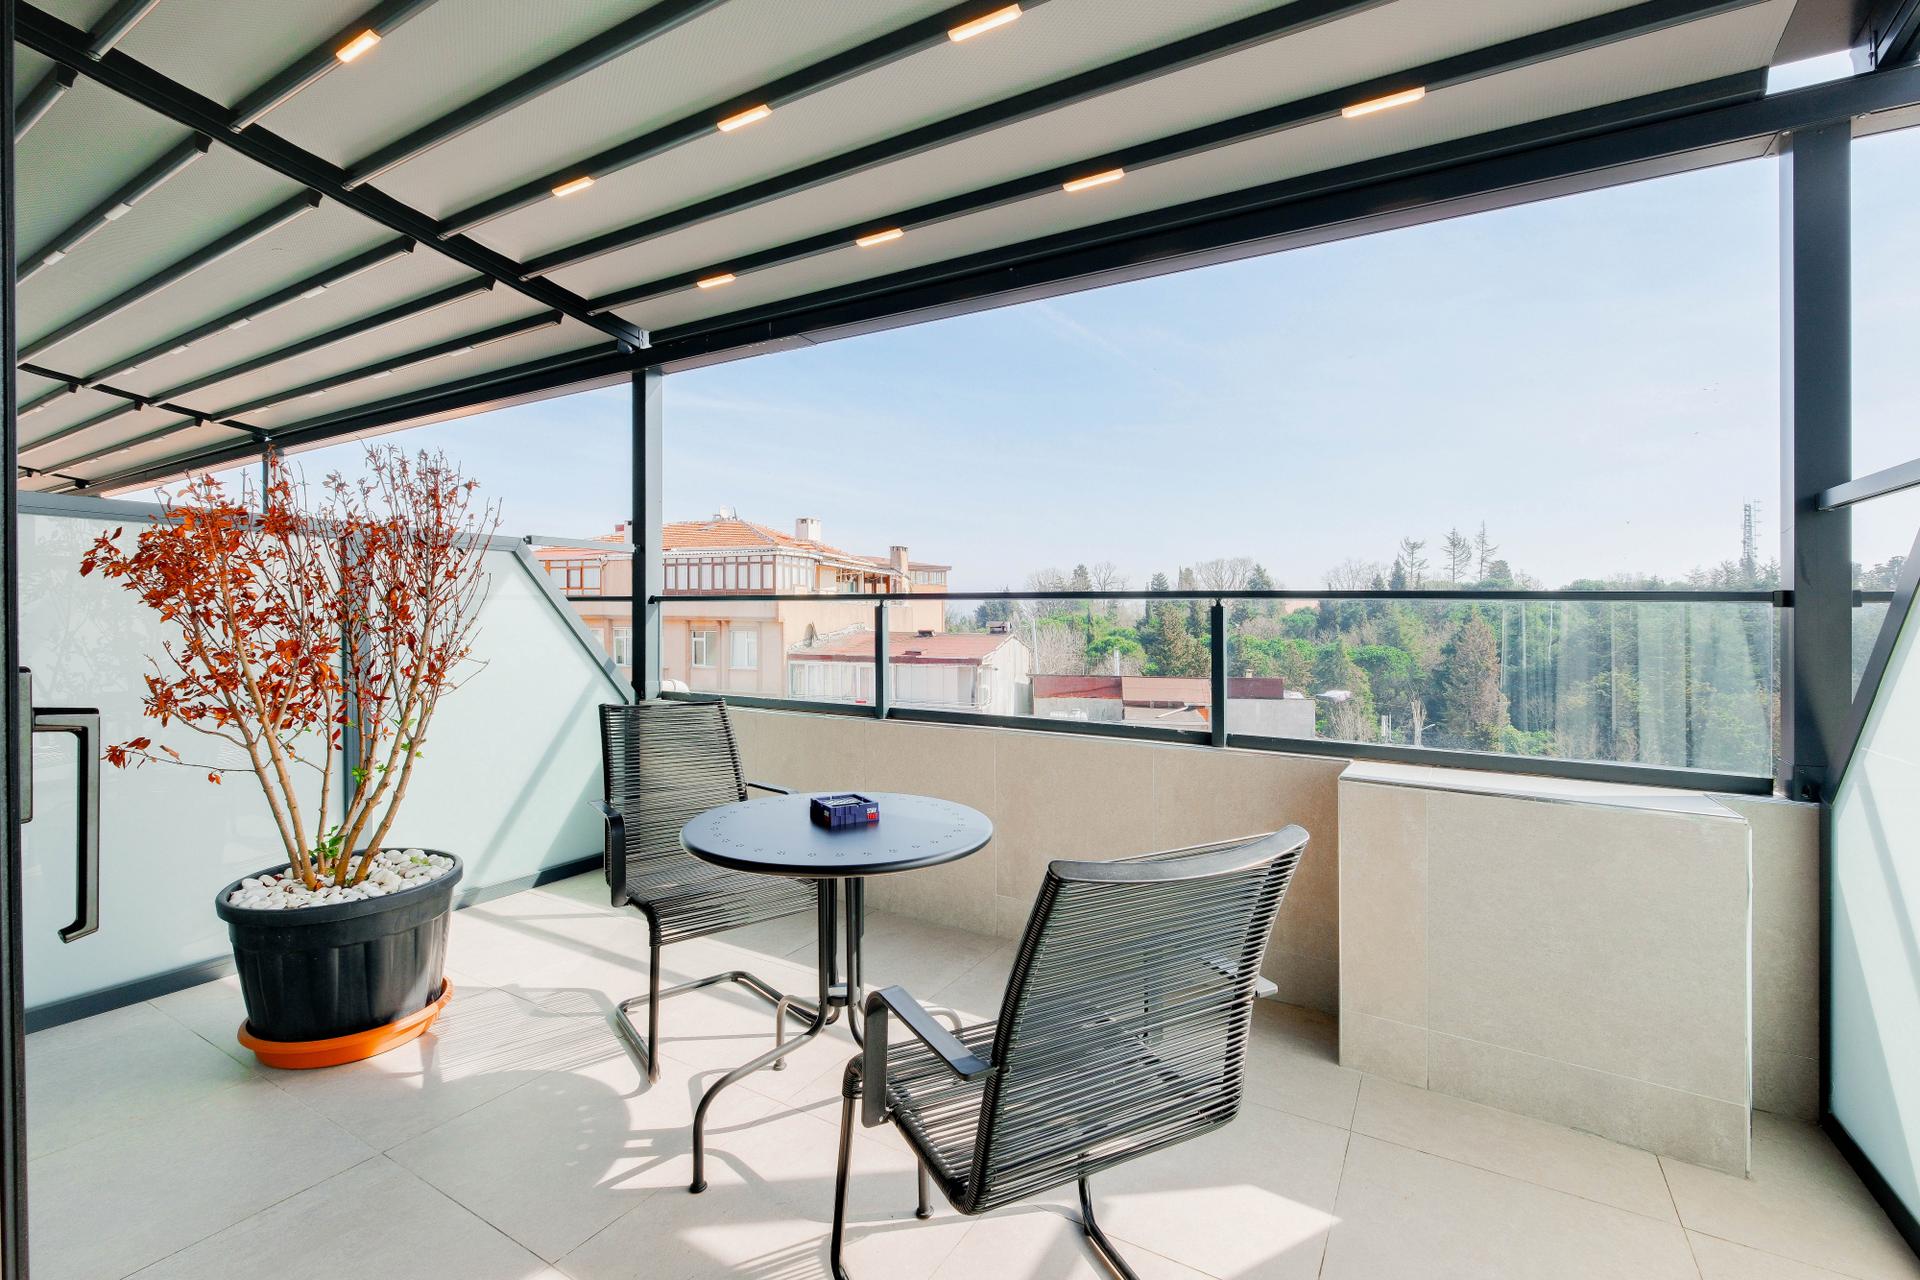 Enjoy the fresh air and panoramic vistas from our house's expansive terrace.